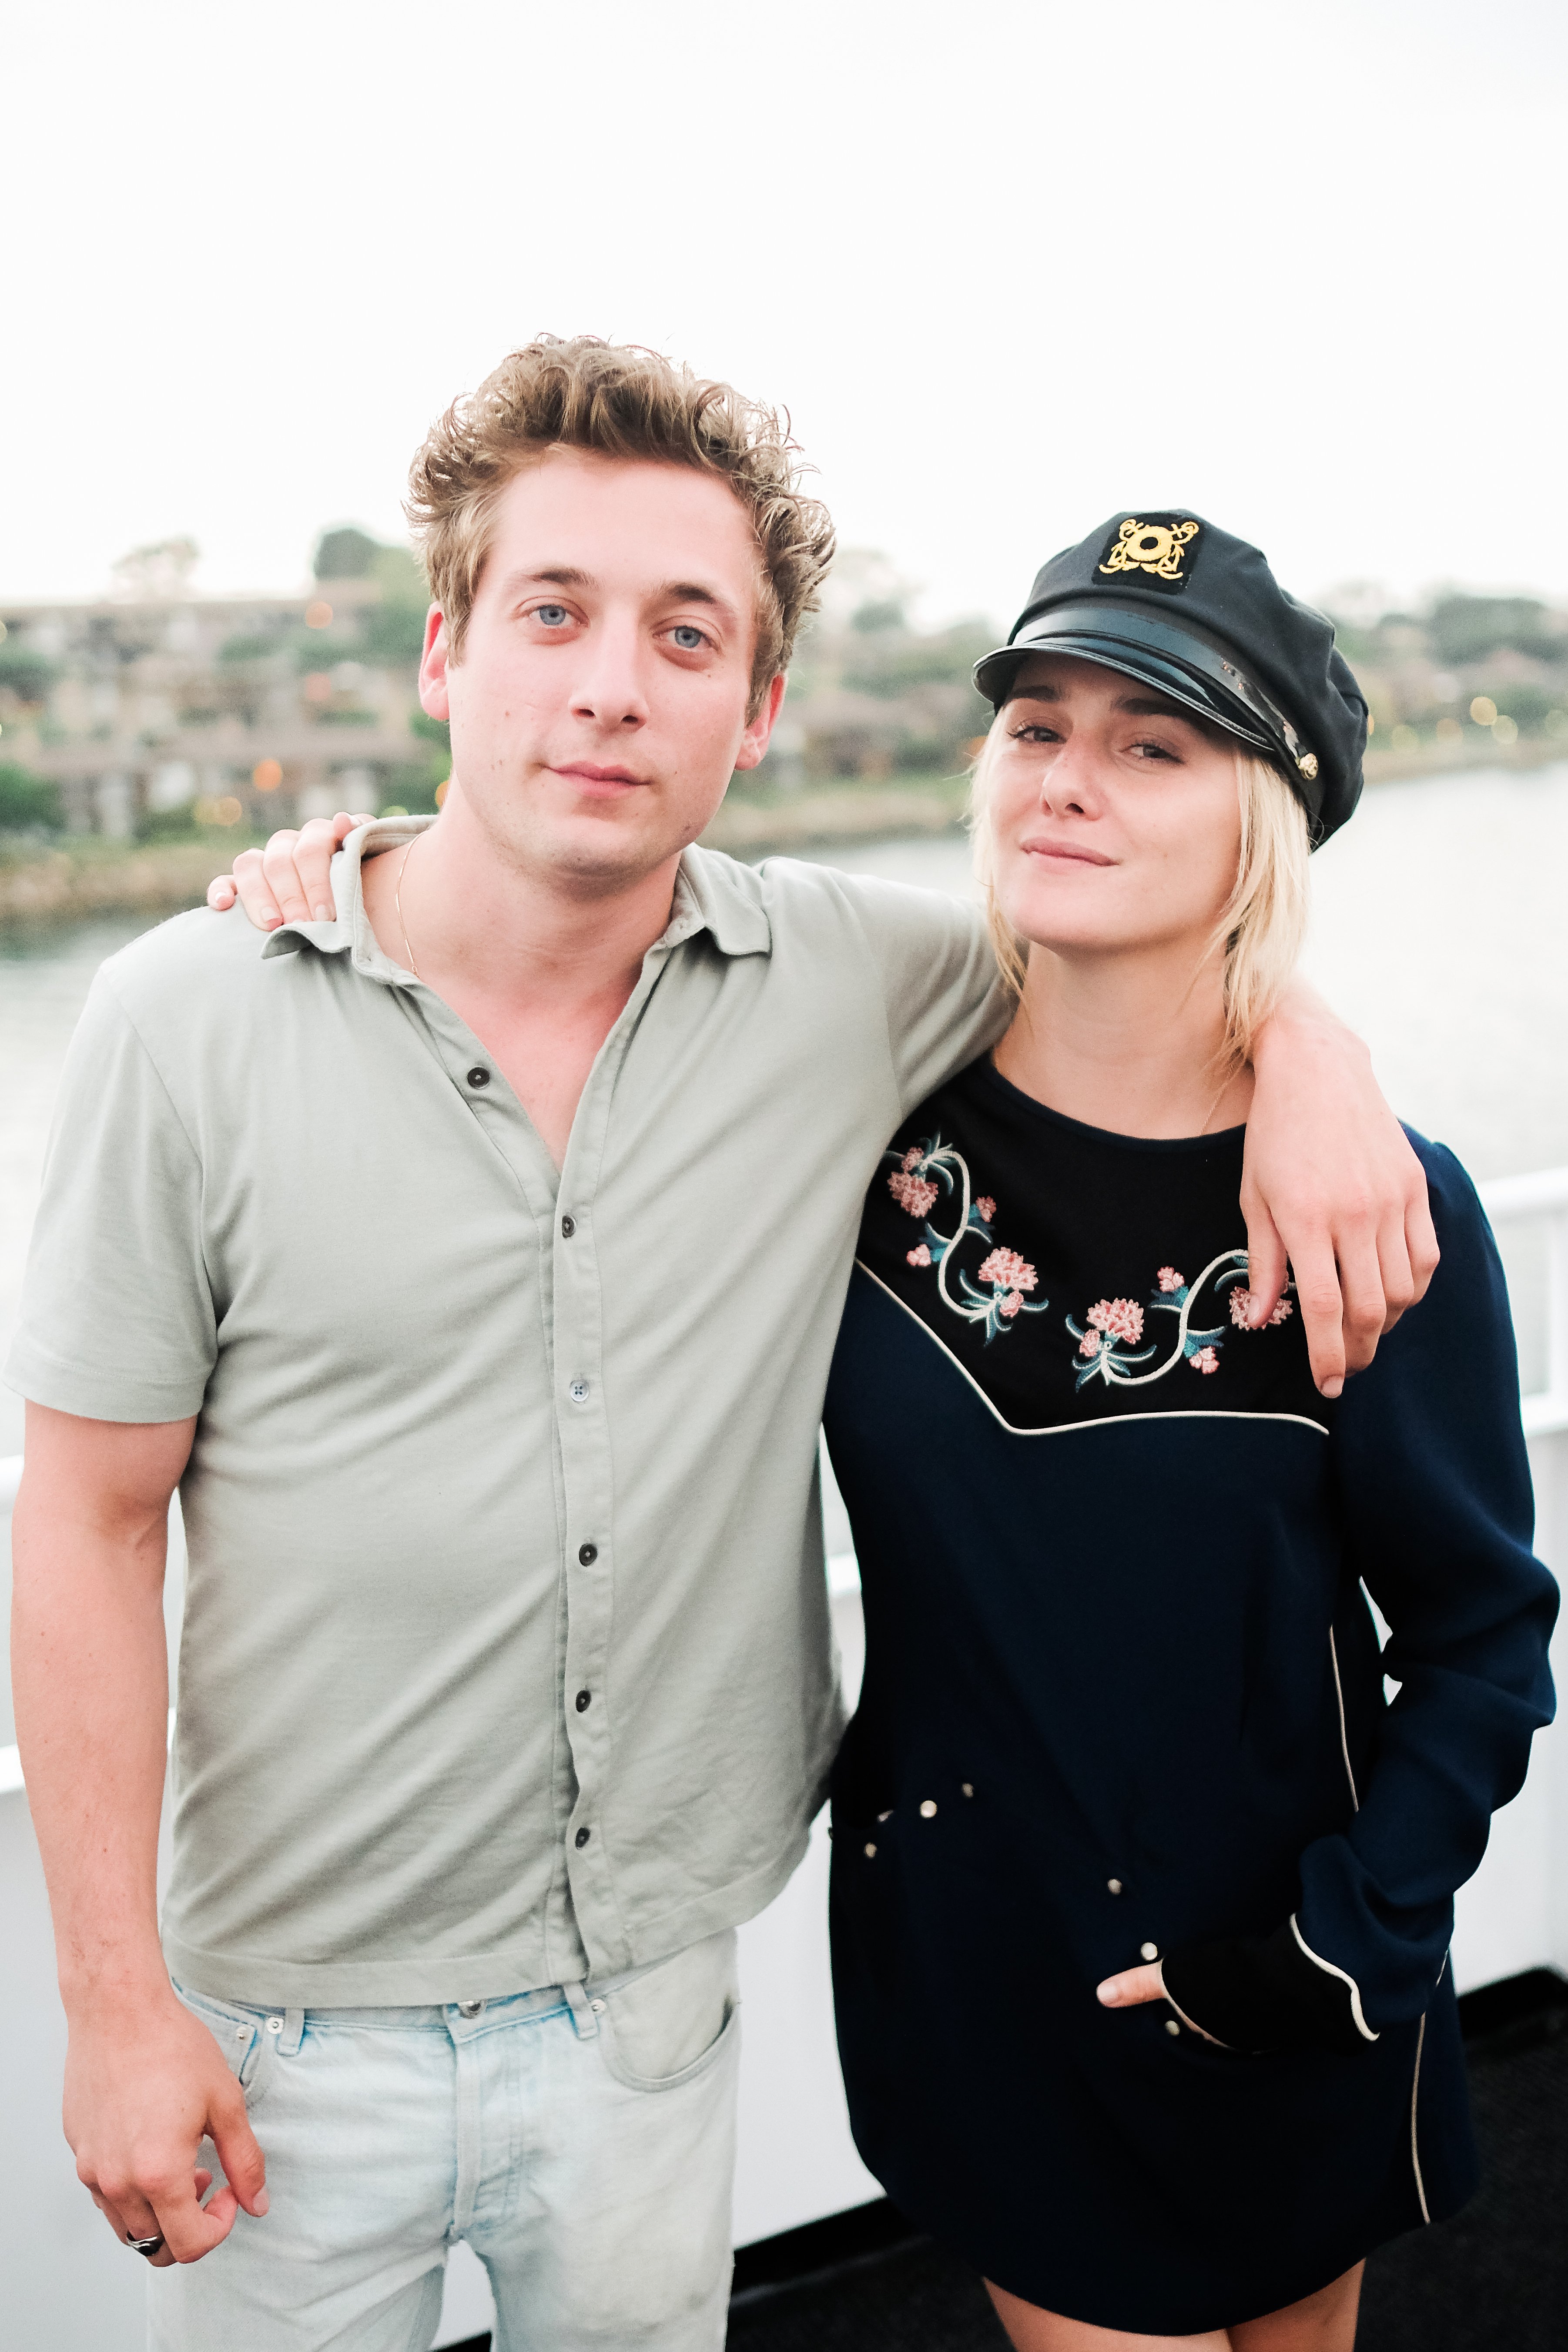 Jeremy Allen White and Addison Timlin at Steve Howey's 40th birthday party on July 16, 2017 | Source: Getty Images